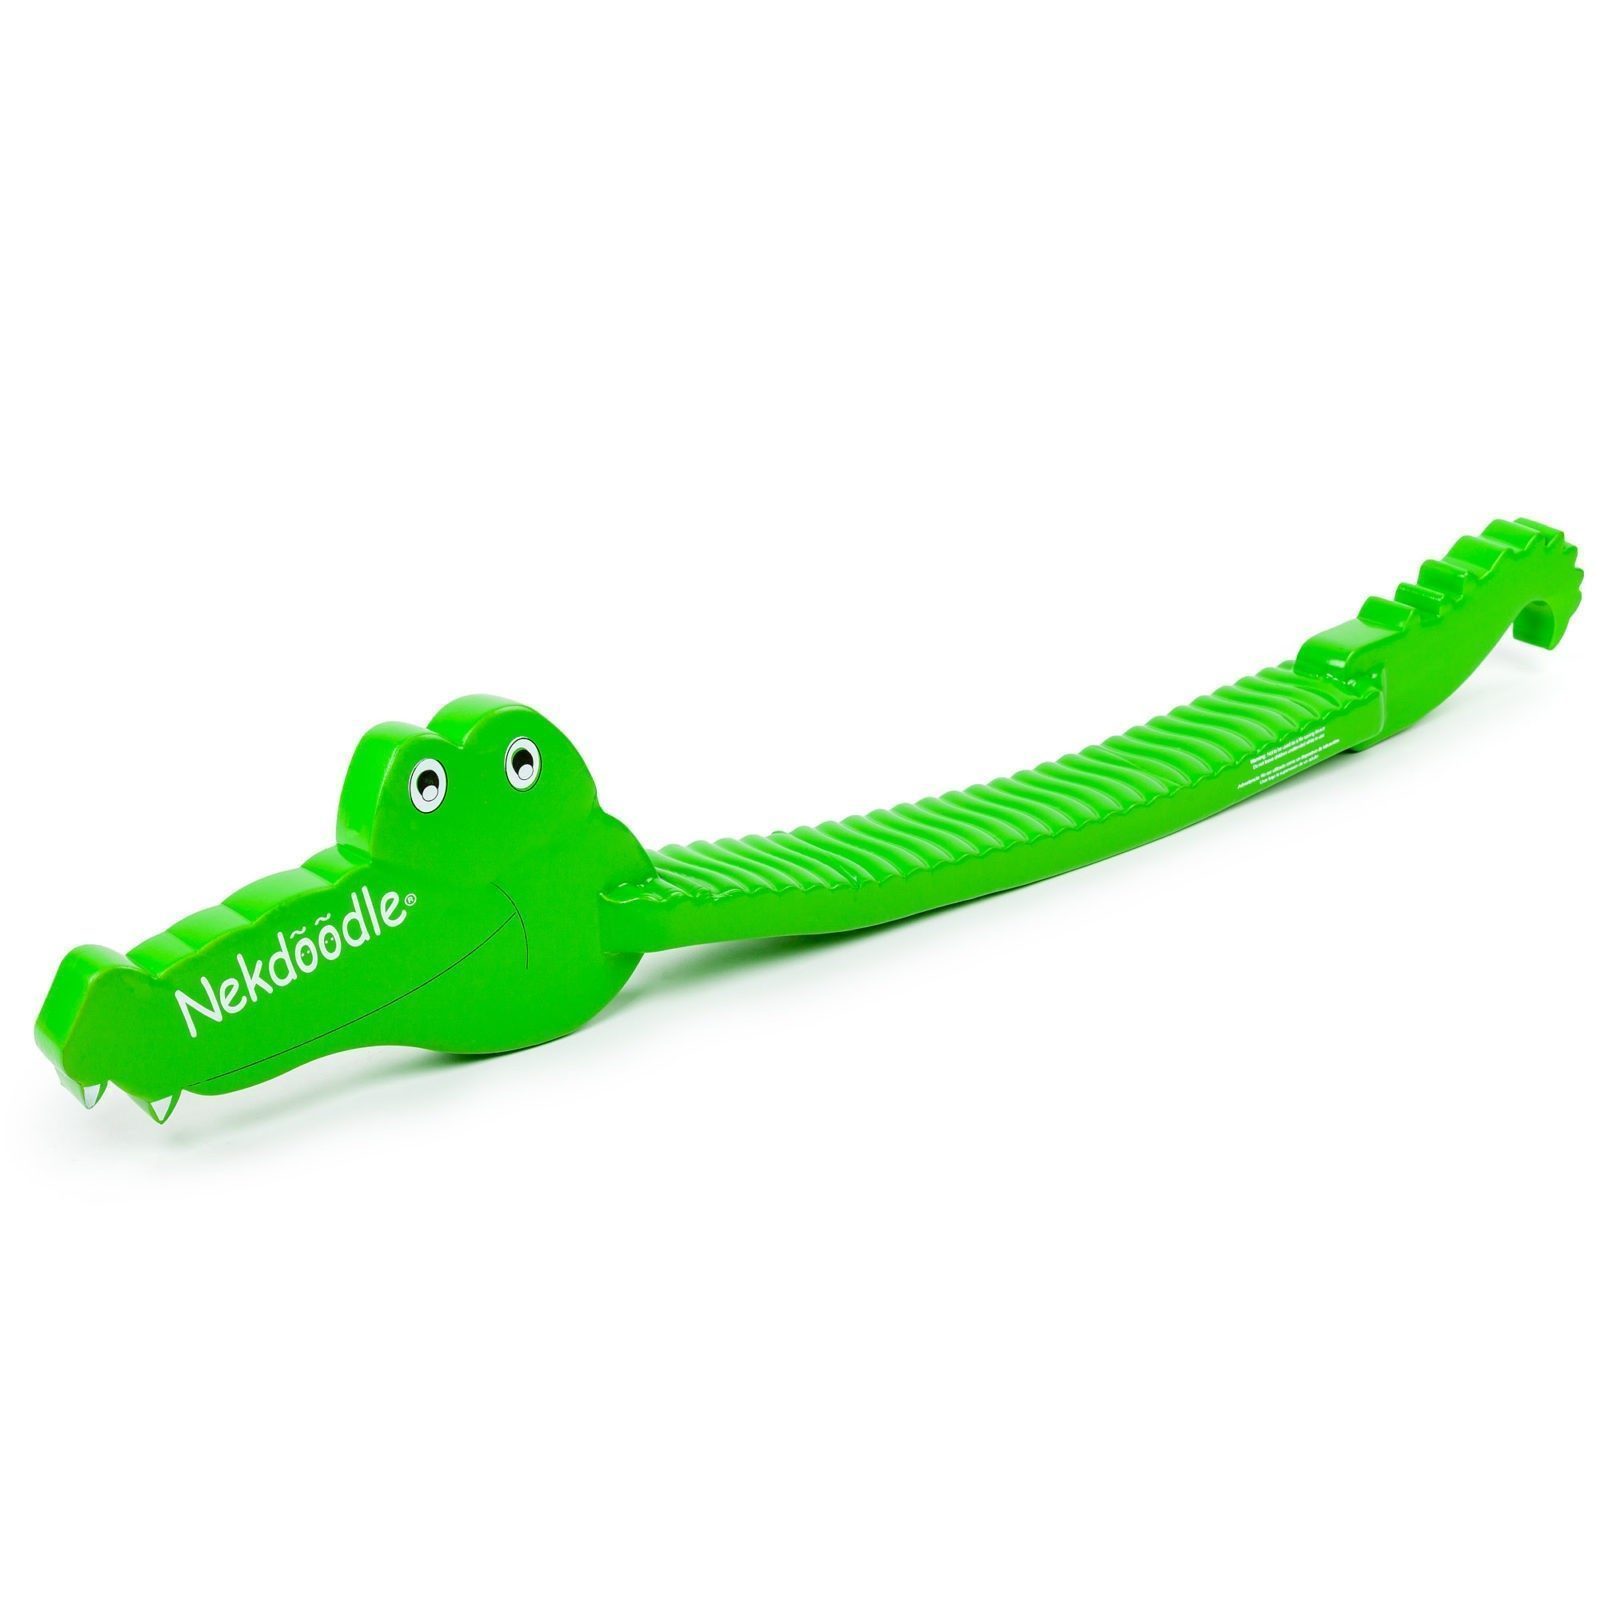 Swim Training /& Exercise Aid Lime Green Alligator Nekdoodle Swimming Pool Noodle for Kids Fun /& Recreational Pool Toy